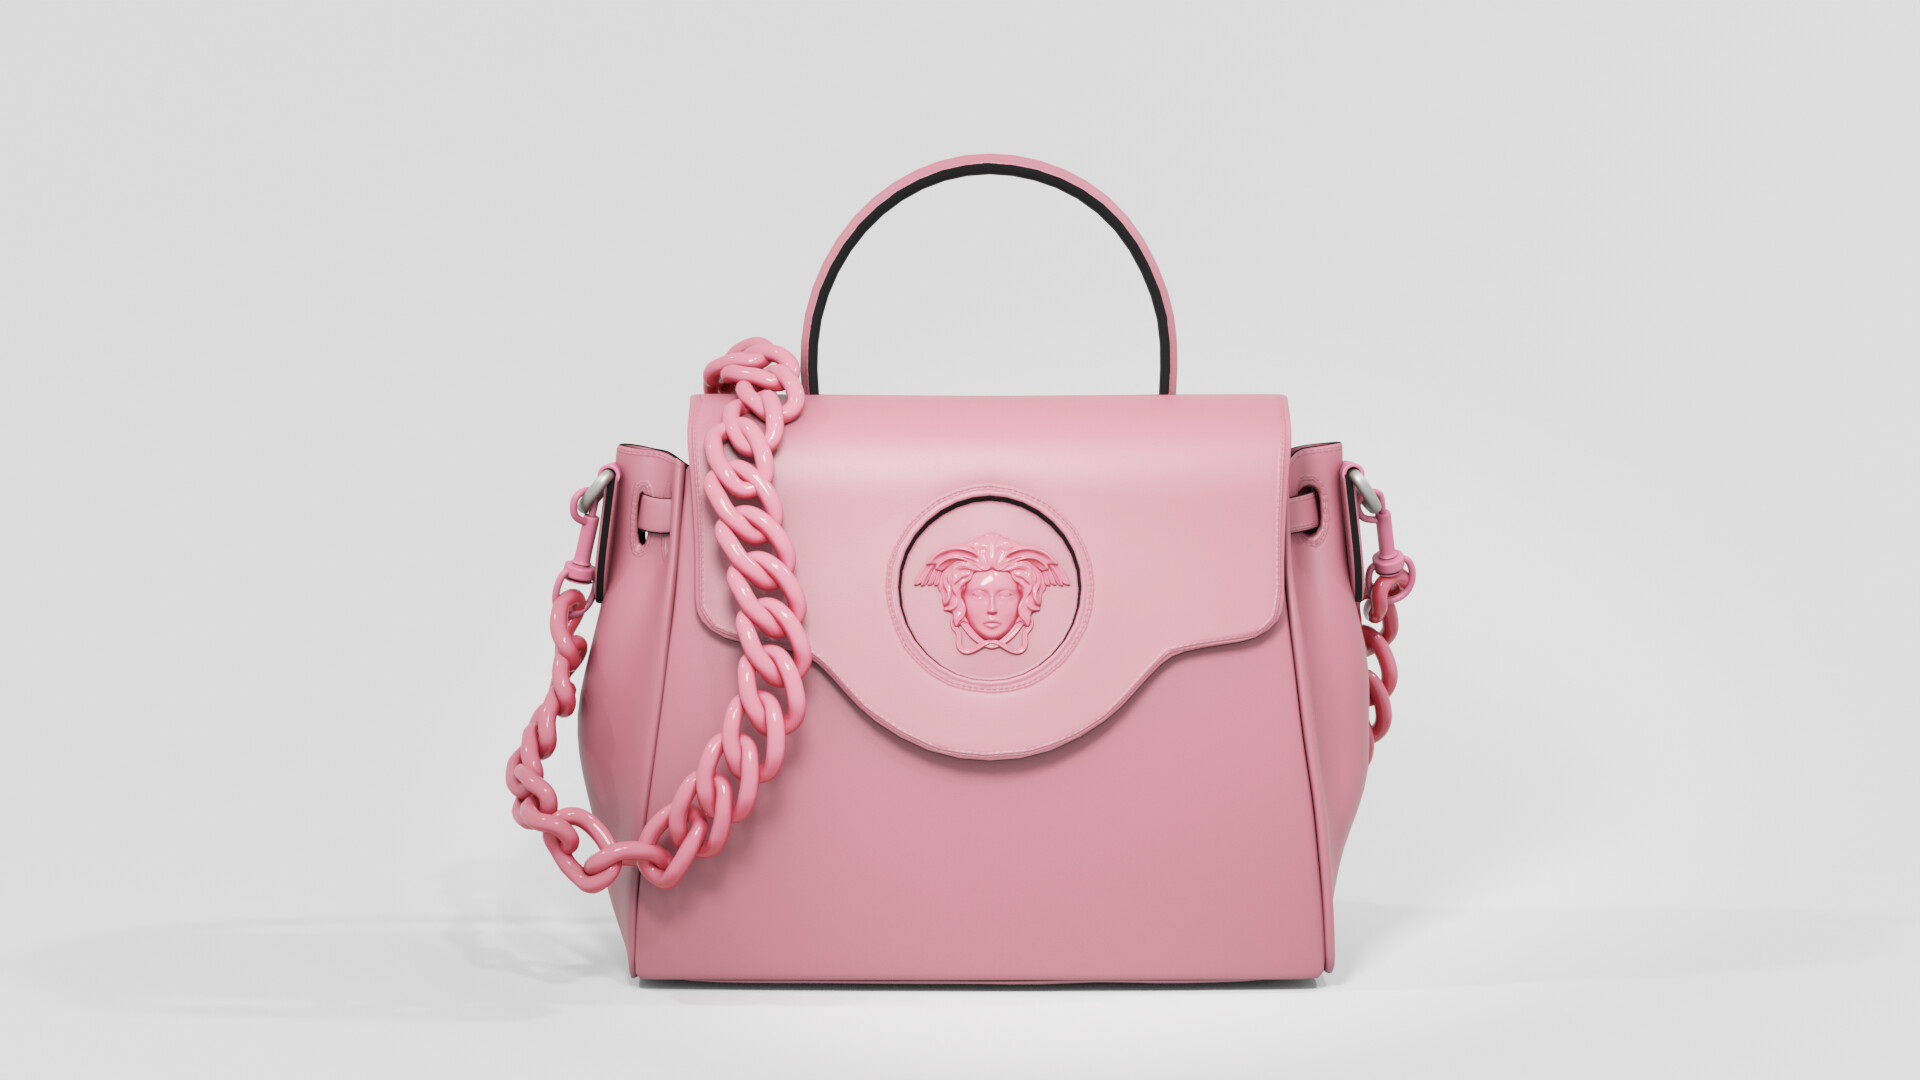 Versace Pink Purse - Finished Projects - Blender Artists Community